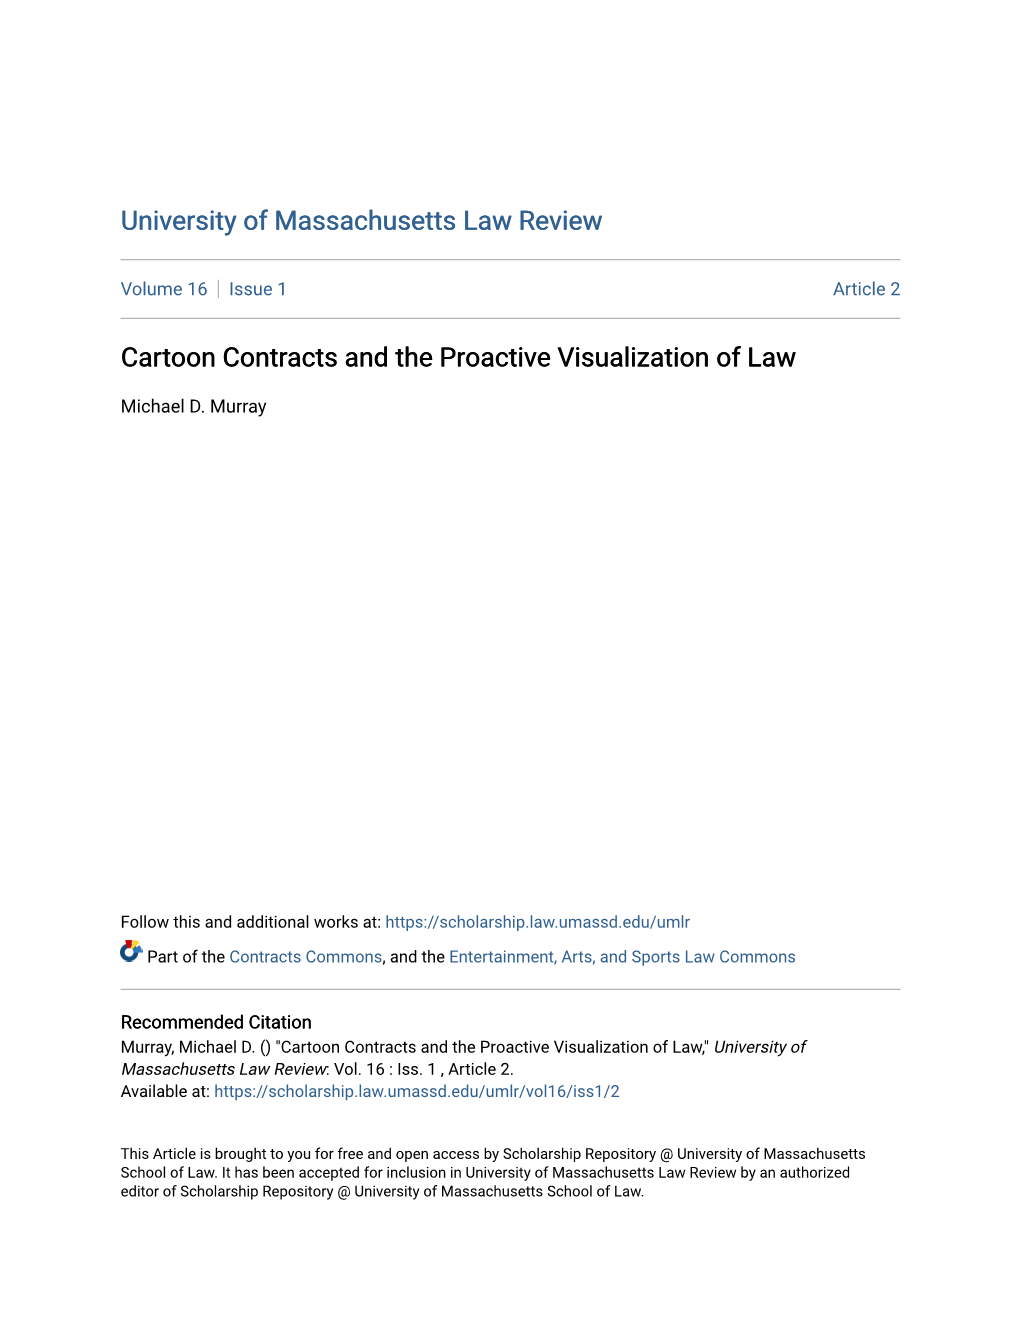 Cartoon Contracts and the Proactive Visualization of Law